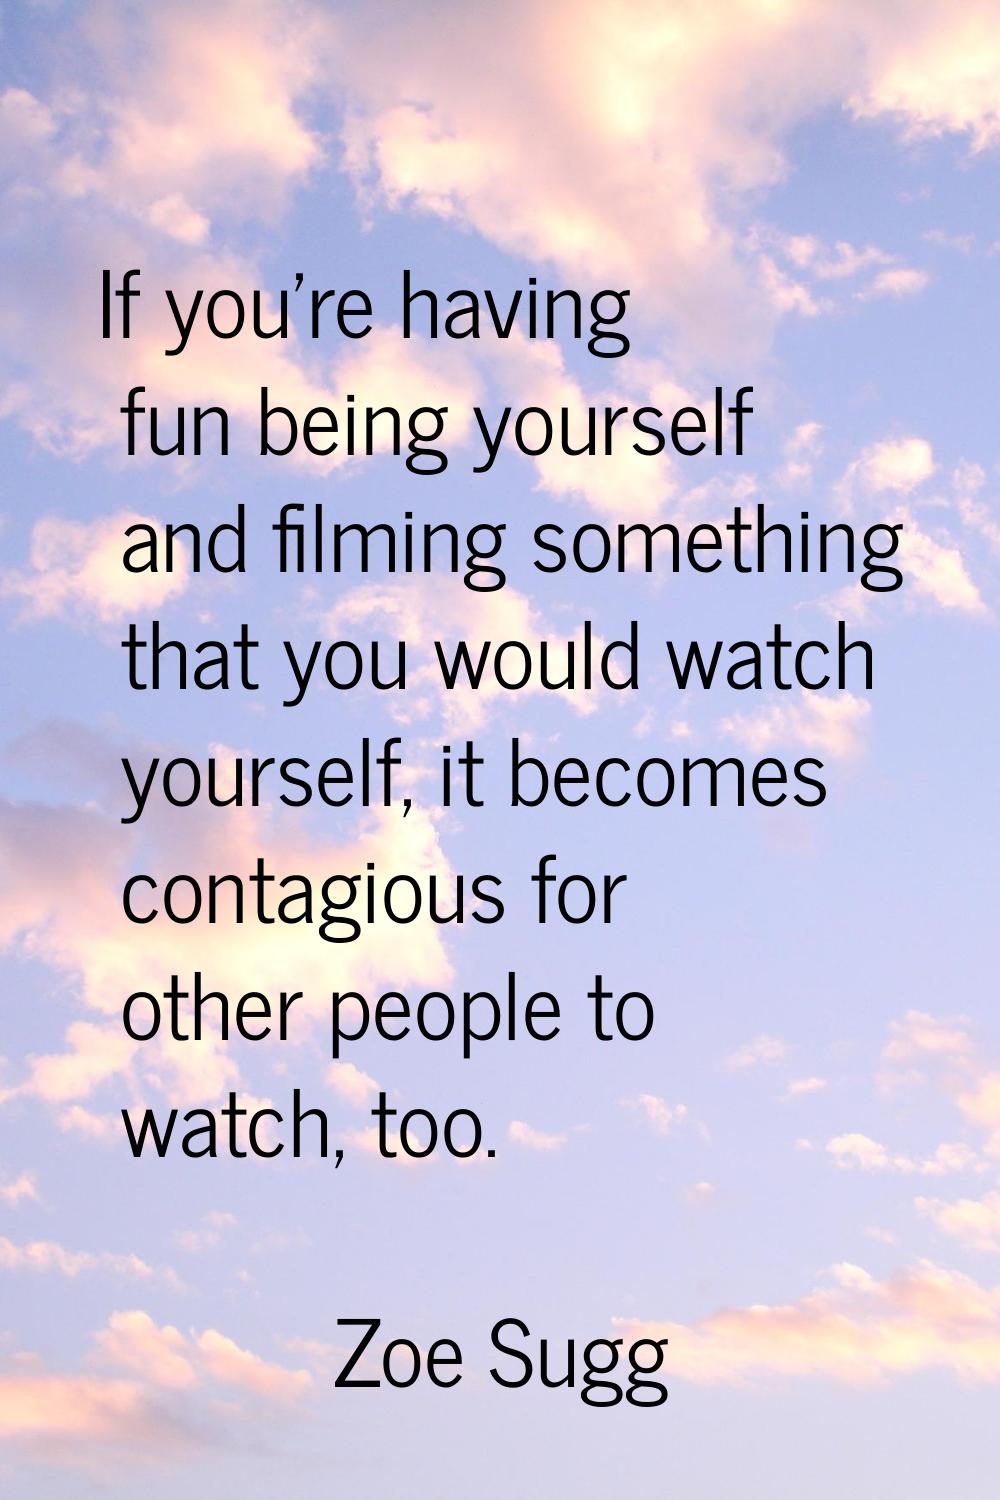 If you're having fun being yourself and filming something that you would watch yourself, it becomes